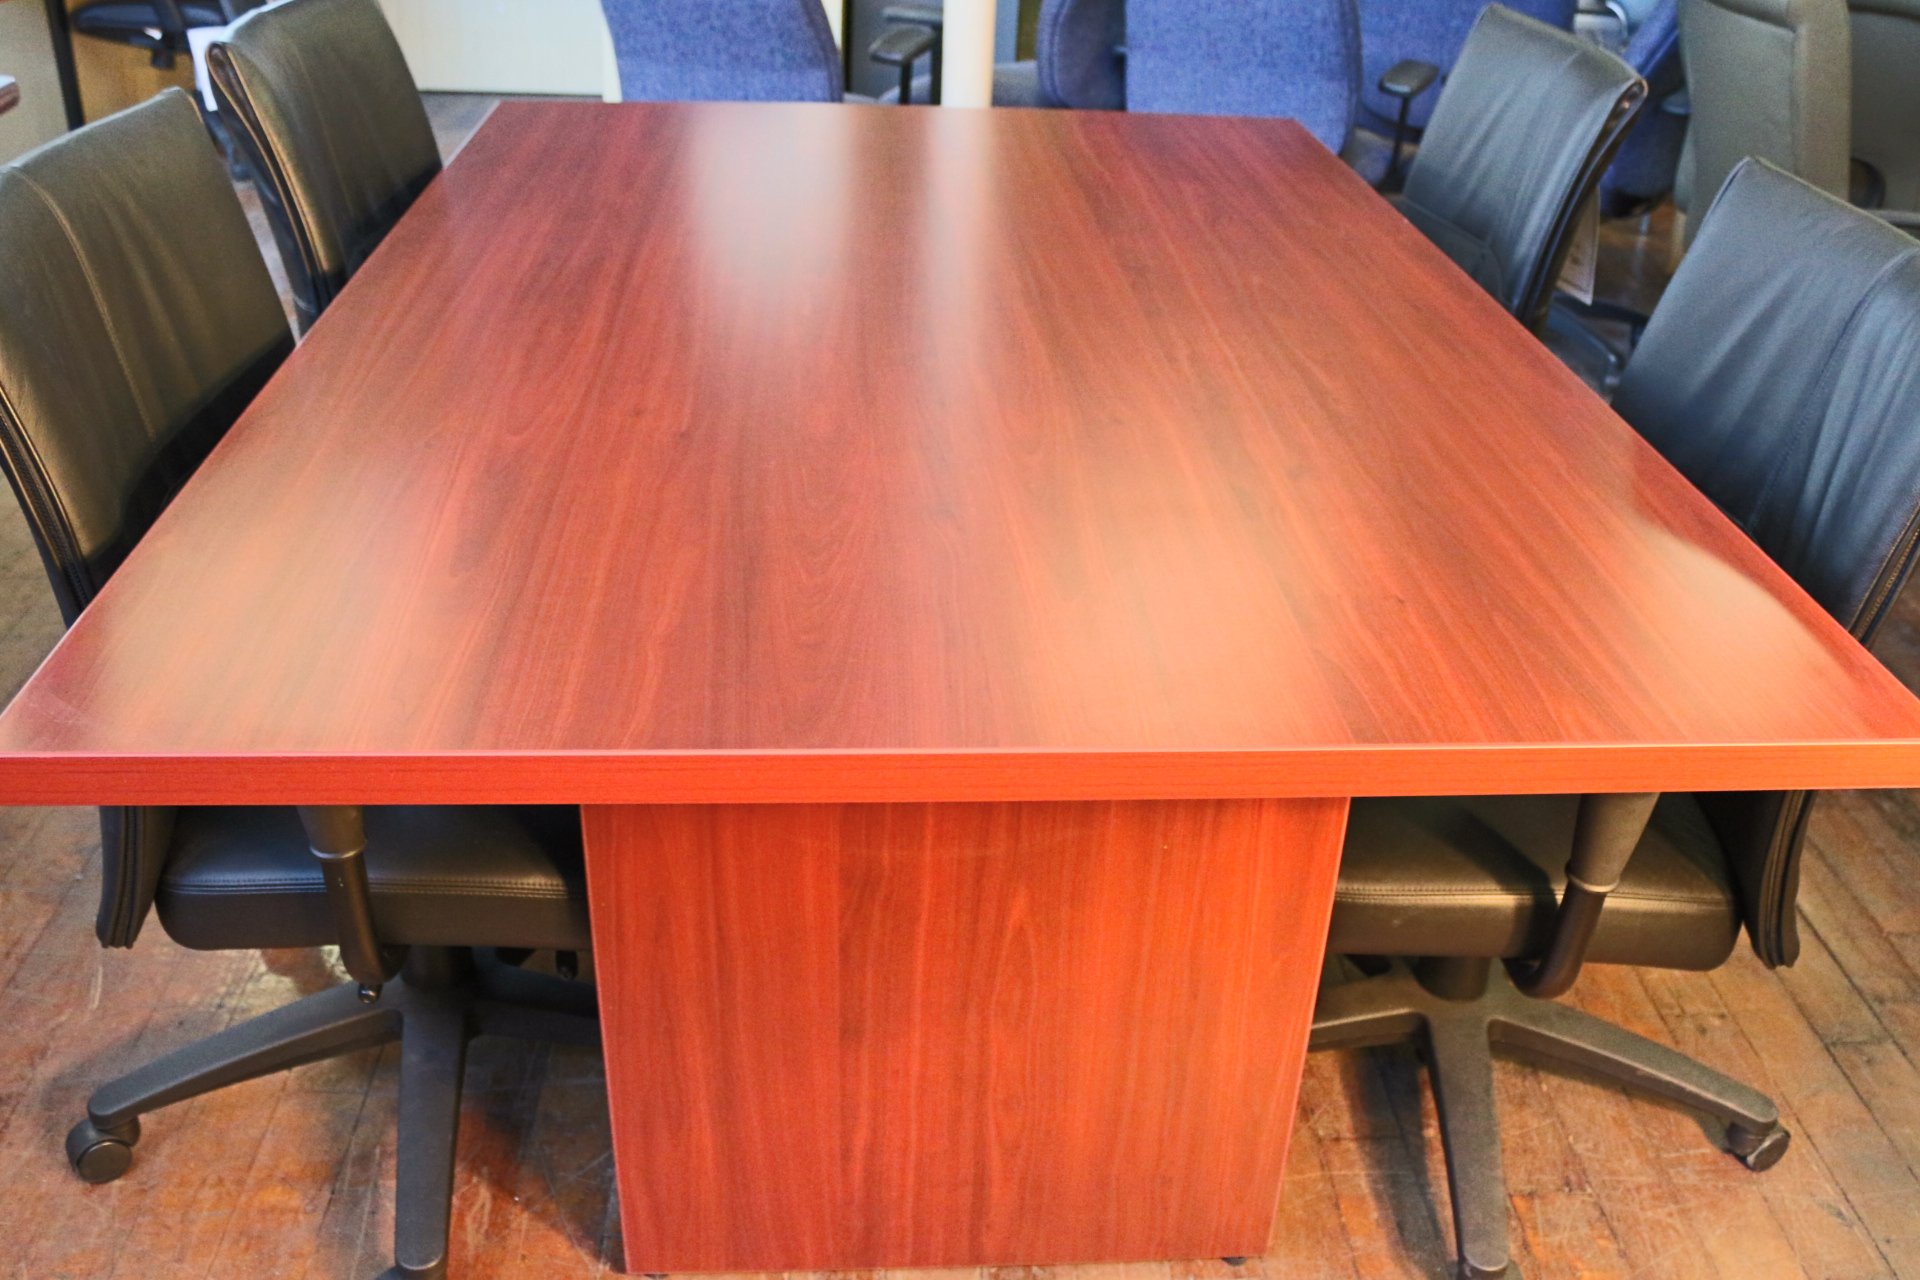 Peartree Baldwin American Cherry 6′ x 4′ Laminate Conference Table